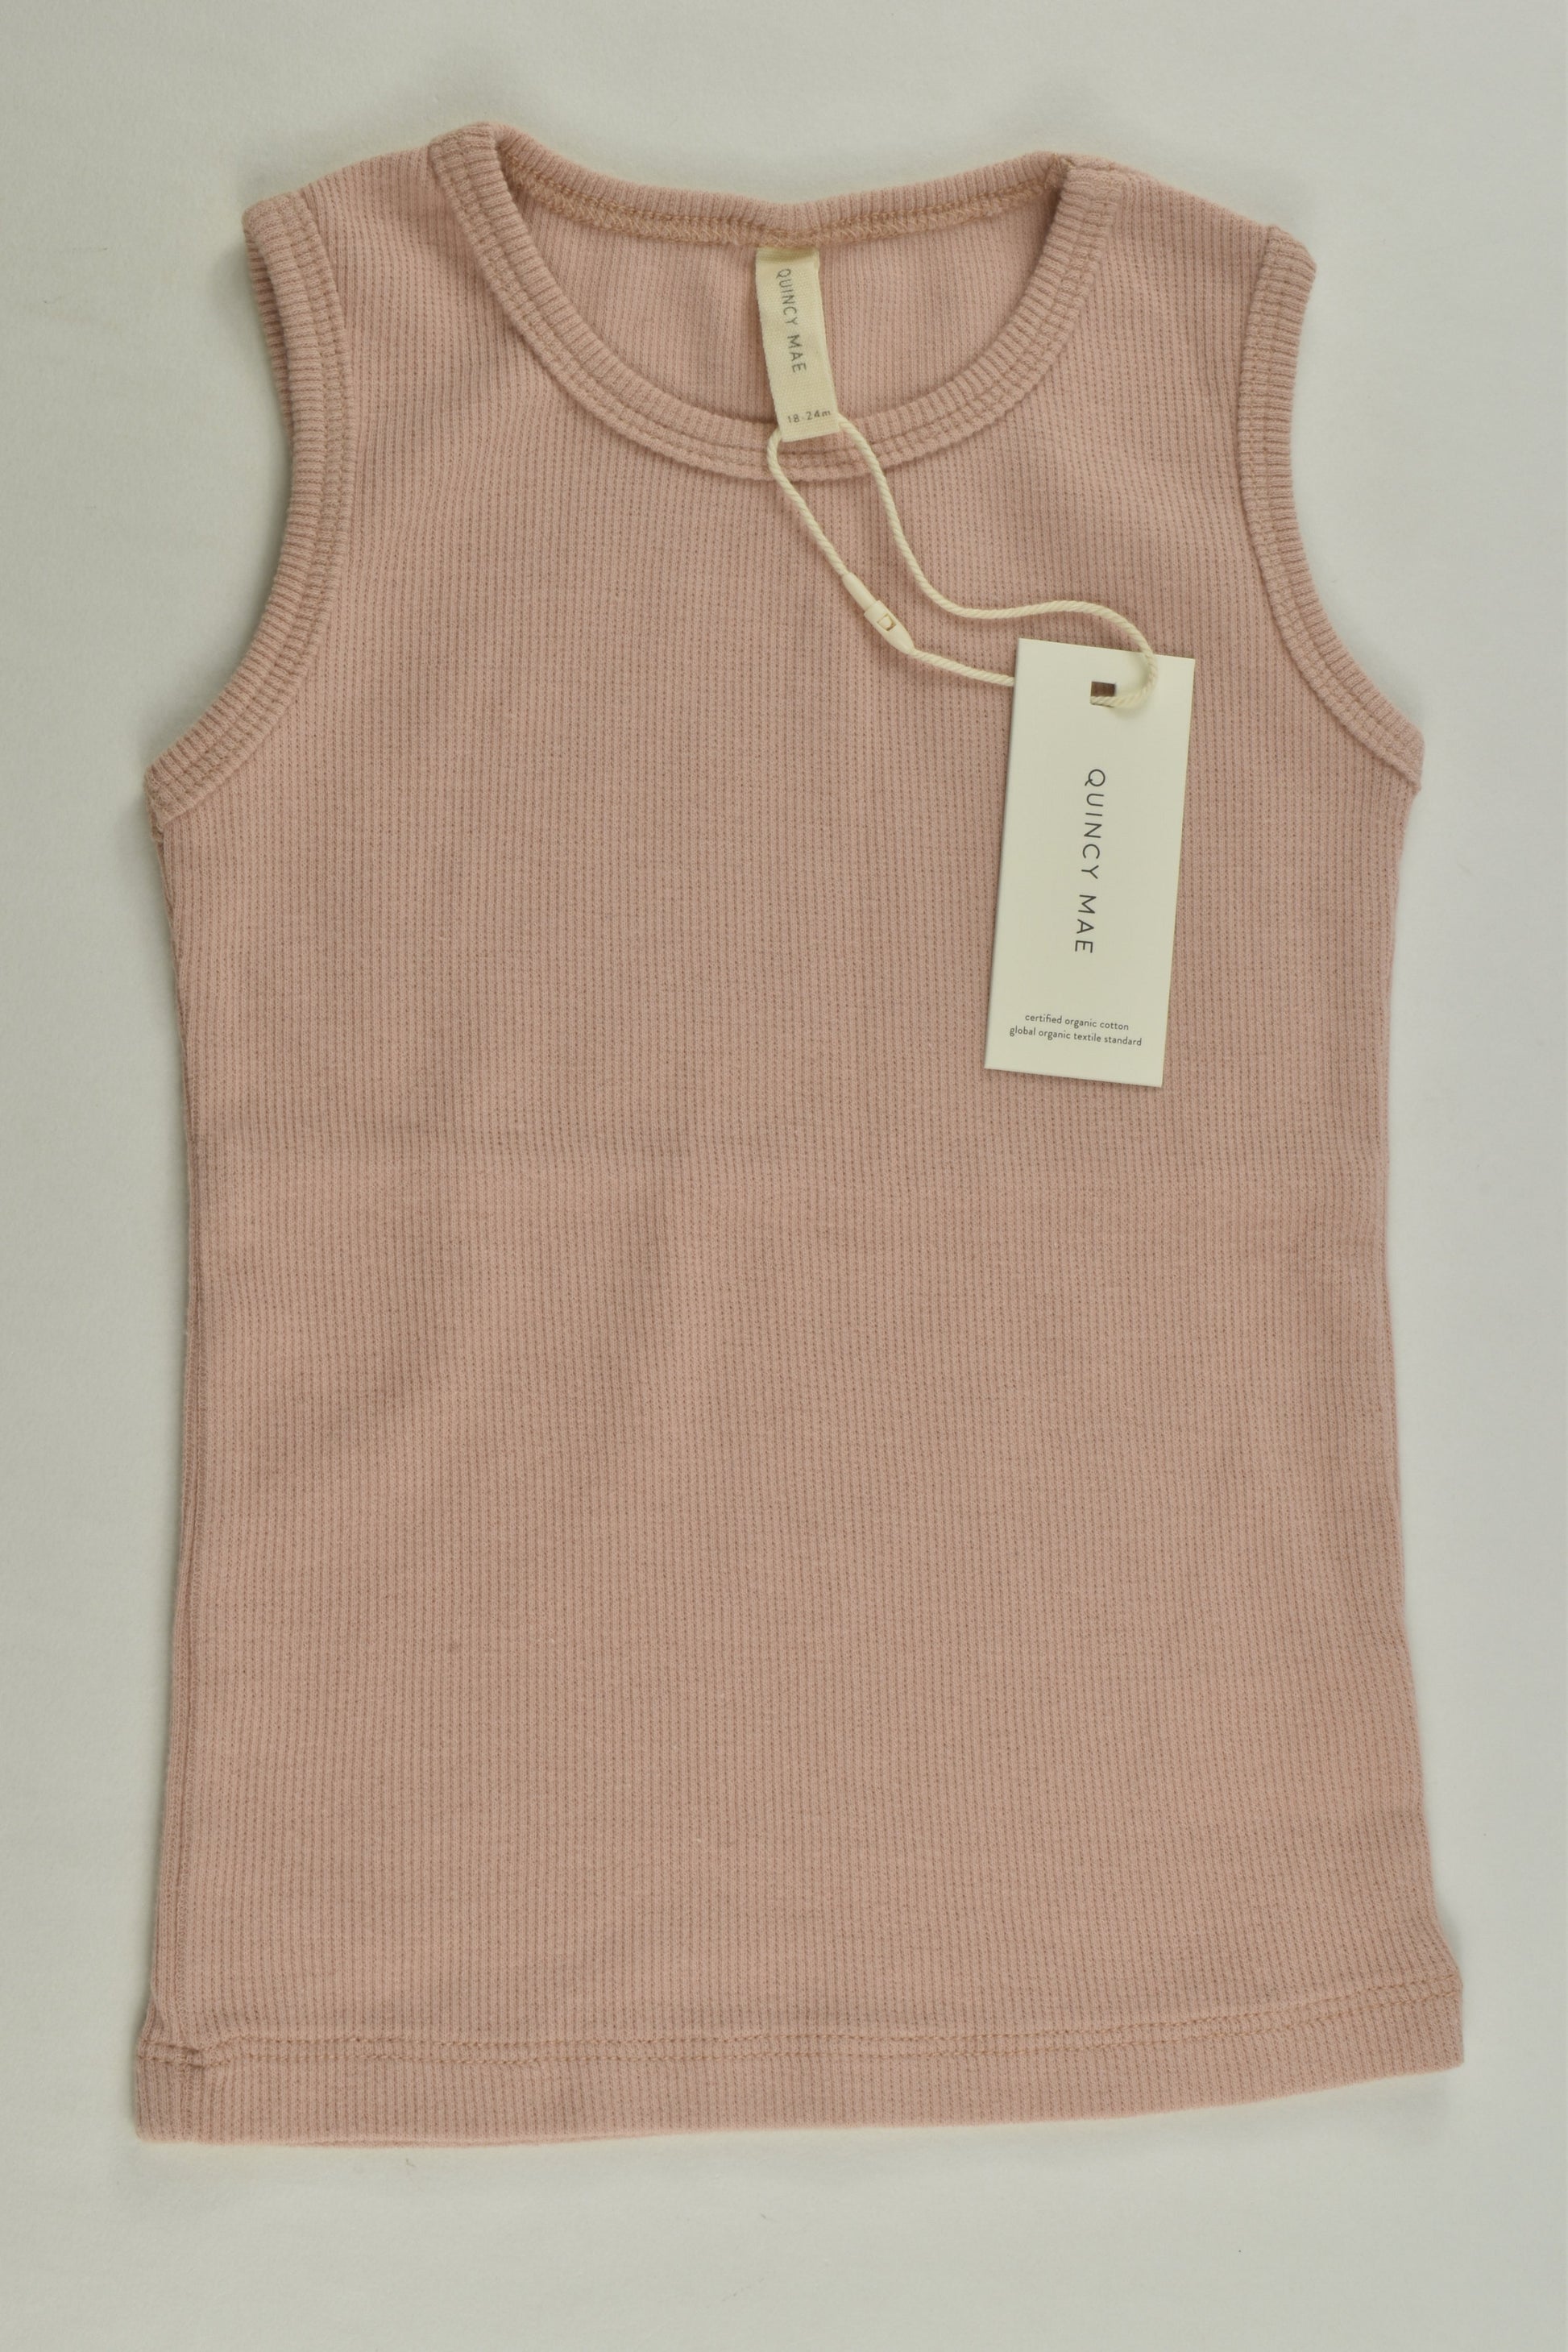 NEW Quincy Mae Size 2 (18-24 months) Ribbed Tank Top